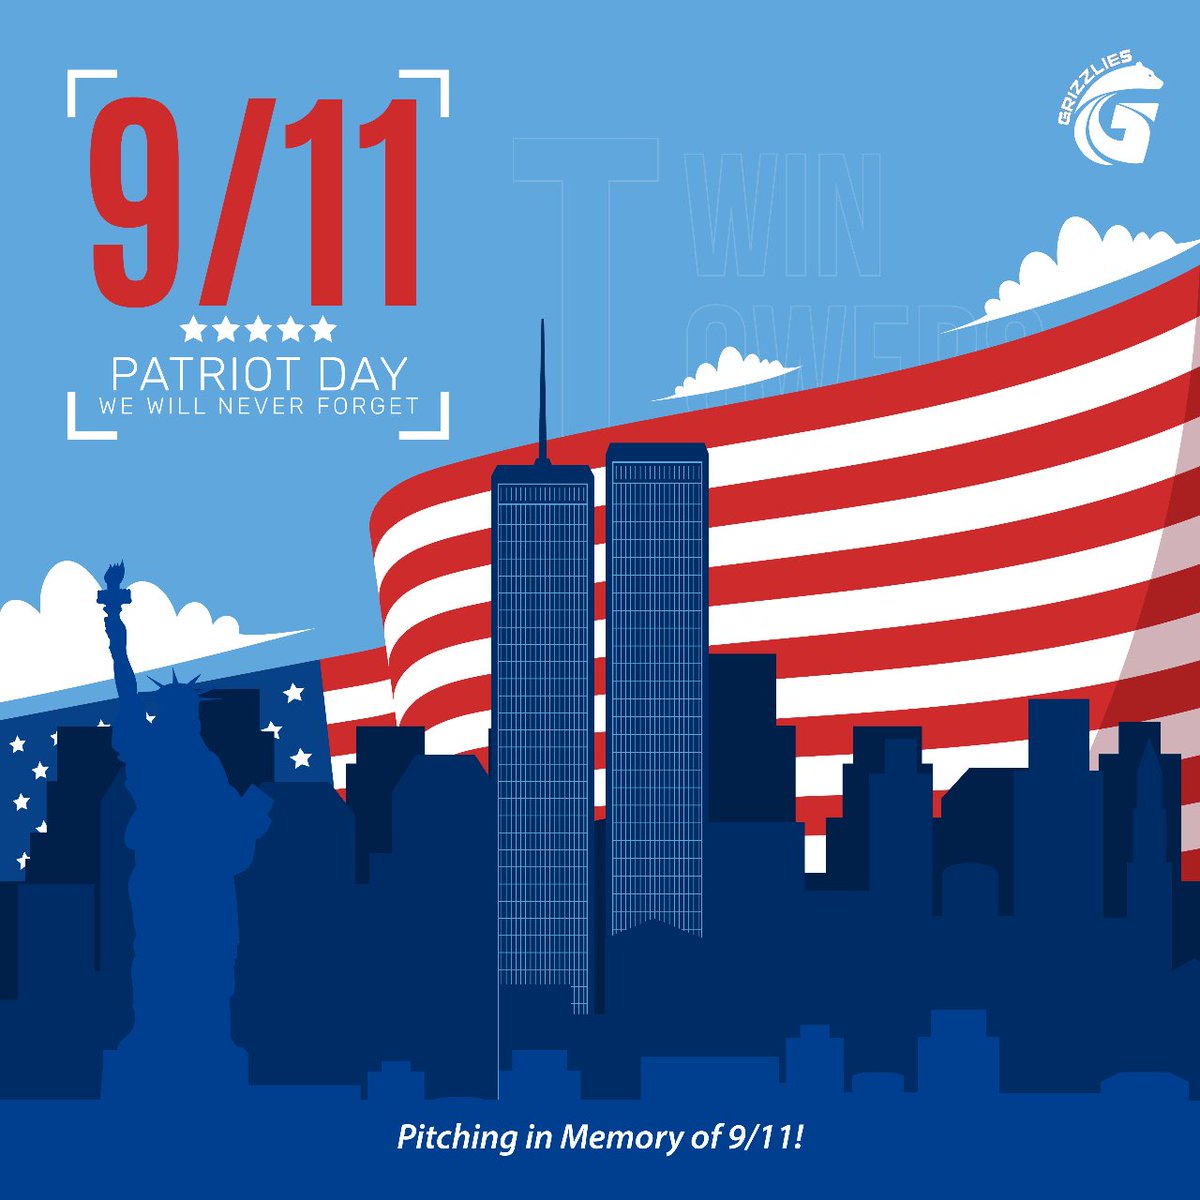 For the fallen heroes of 9/11, remembering the brave and batting for peace.🏟️
On this solemn day, our cricket family stands with America! 🇺🇸🏏

#MiLC #USAcricket #GoldenStateGrizzlies #GSG #US #USA #laborday #laborday2023

#cricket #cricketlovers #cricketlife #cricketlove